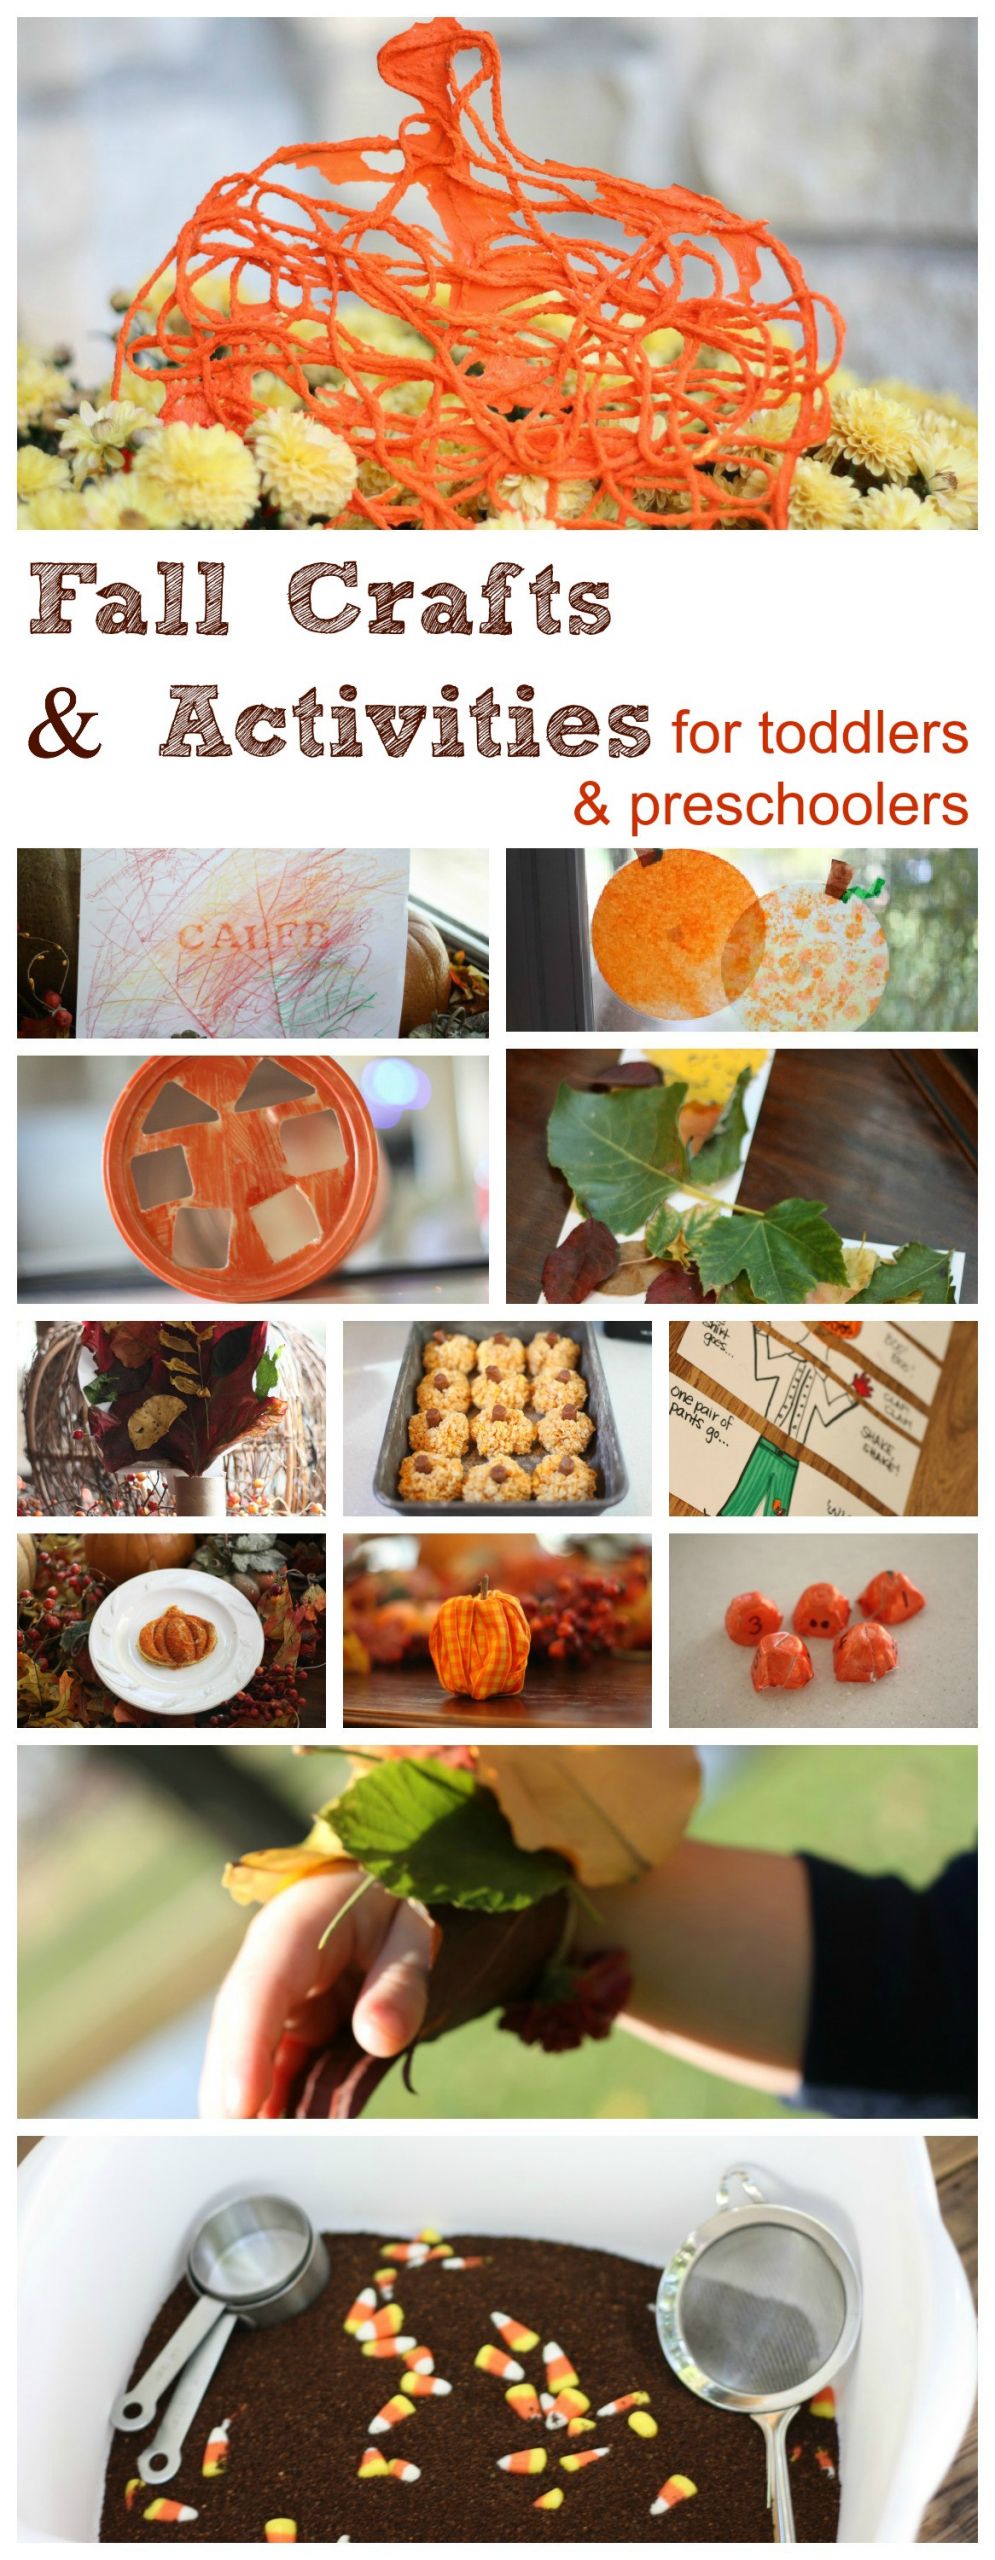 Fall Preschool Craft Ideas
 Fall Crafts and Activities for Preschoolers and Toddlers